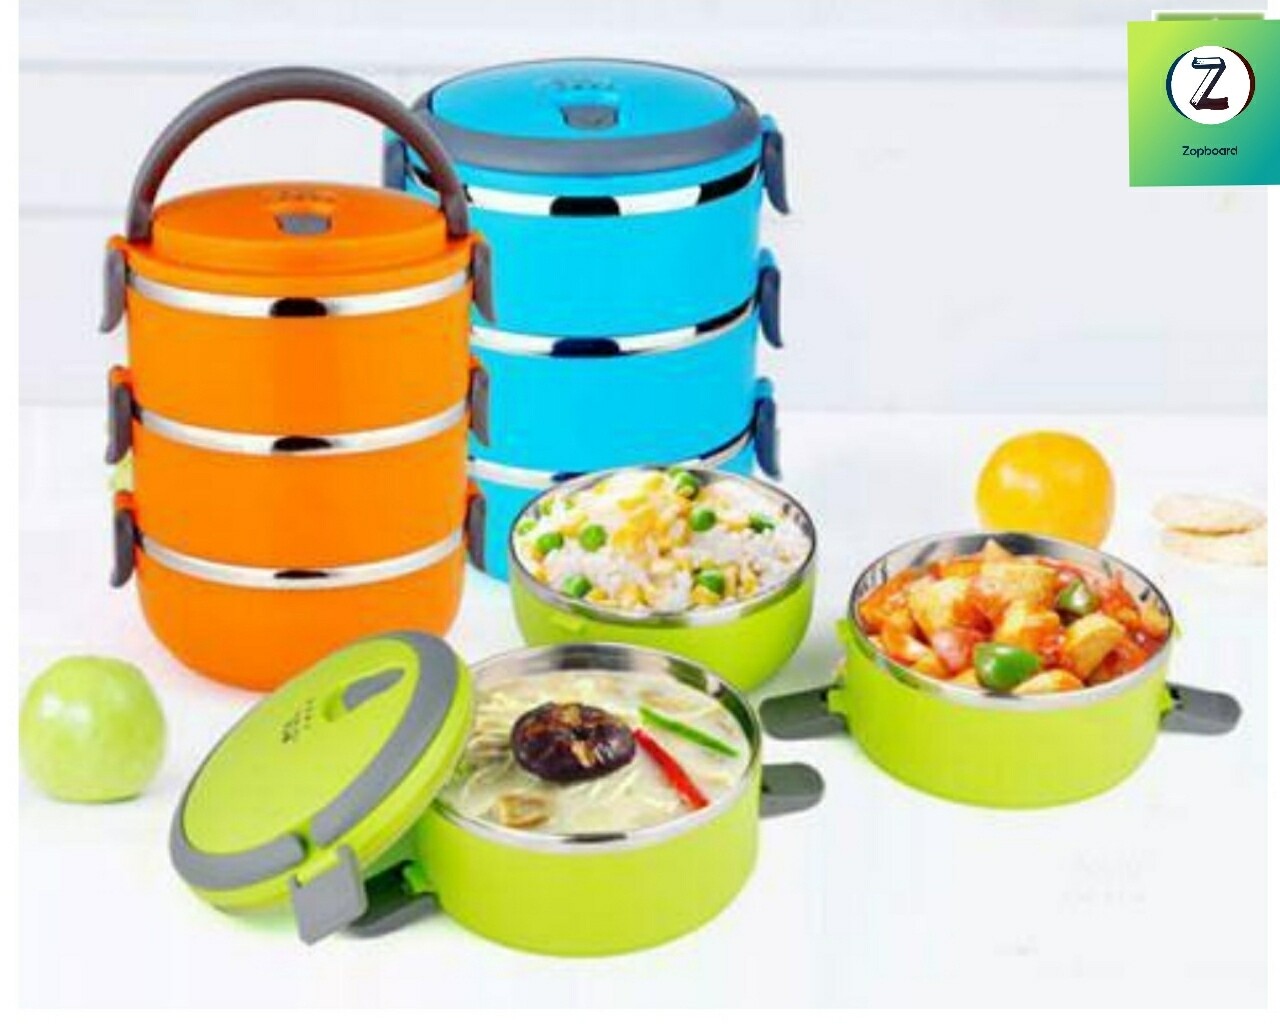 3 Layer Lunch Box - Pack of 1 - Random Color